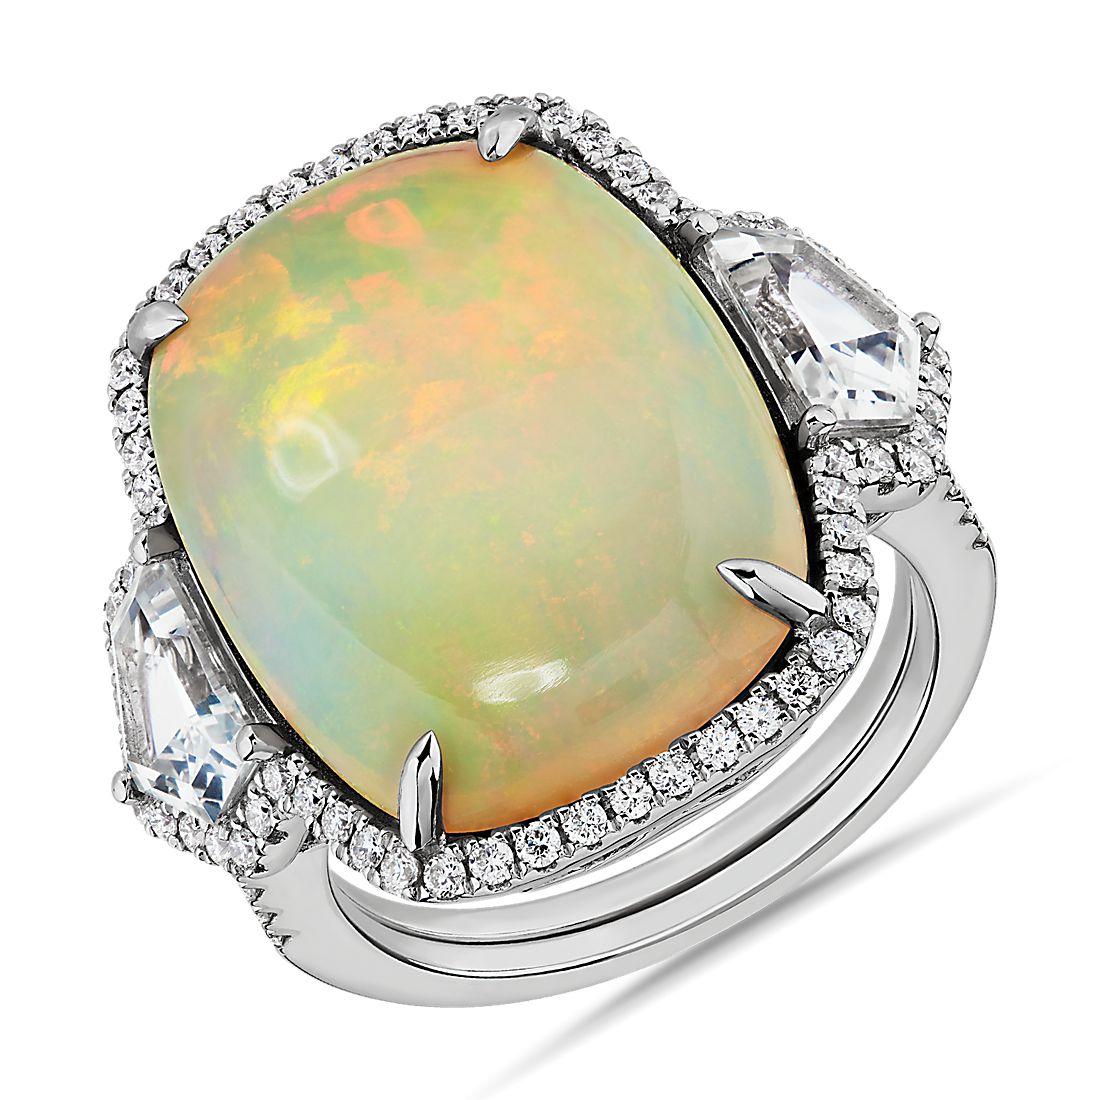 Cushion Cut Opal with Cadillac Cut White Sapphire Ring in 18k White Gold